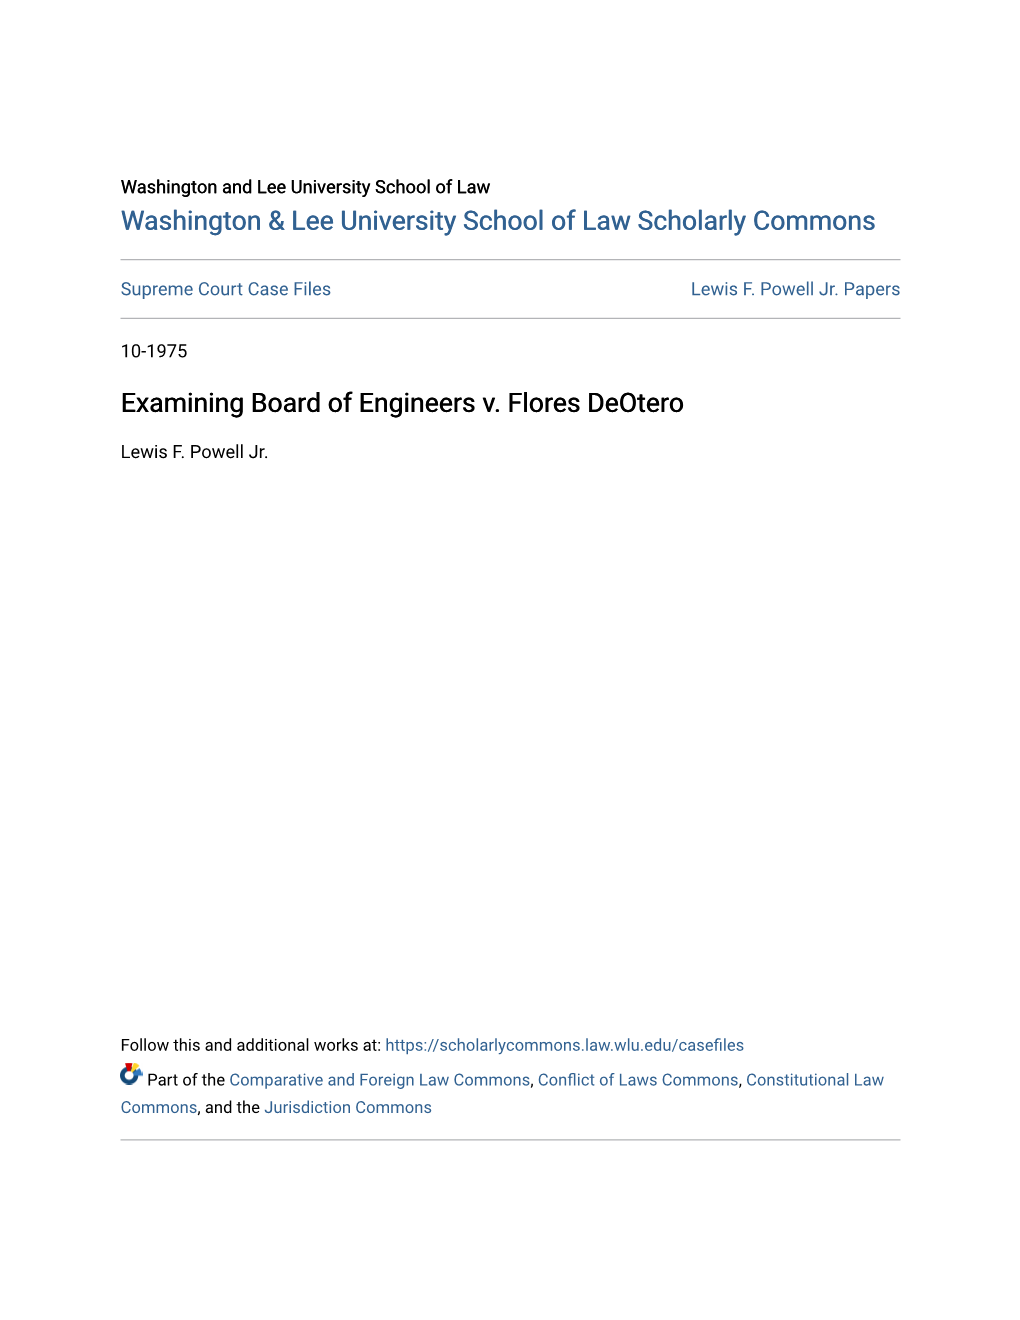 Examining Board of Engineers V. Flores Deotero